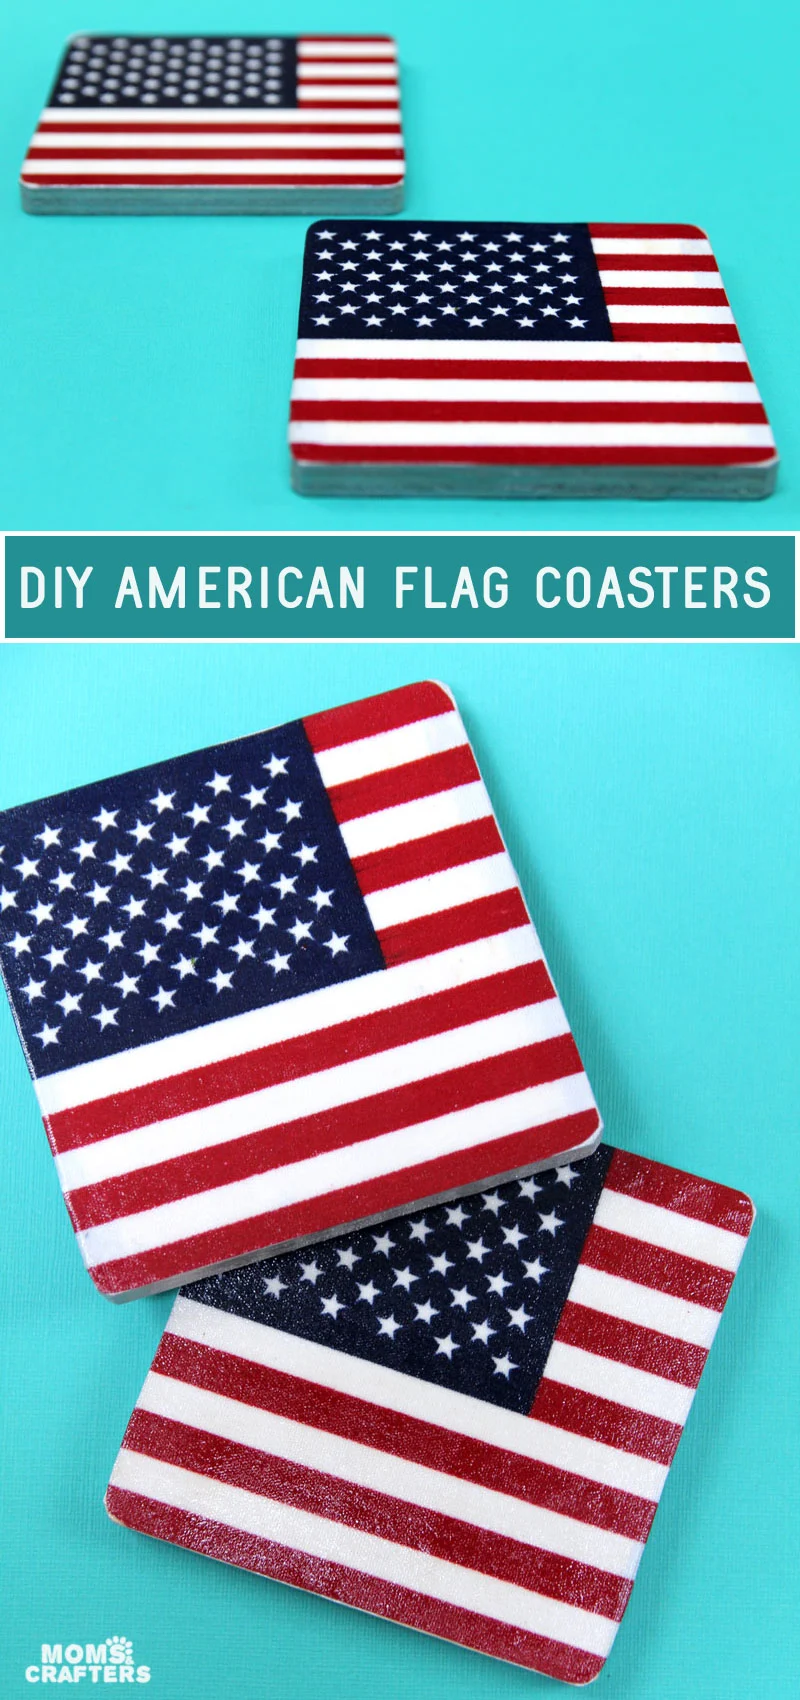 DIY American flag coasters made from parade flags.